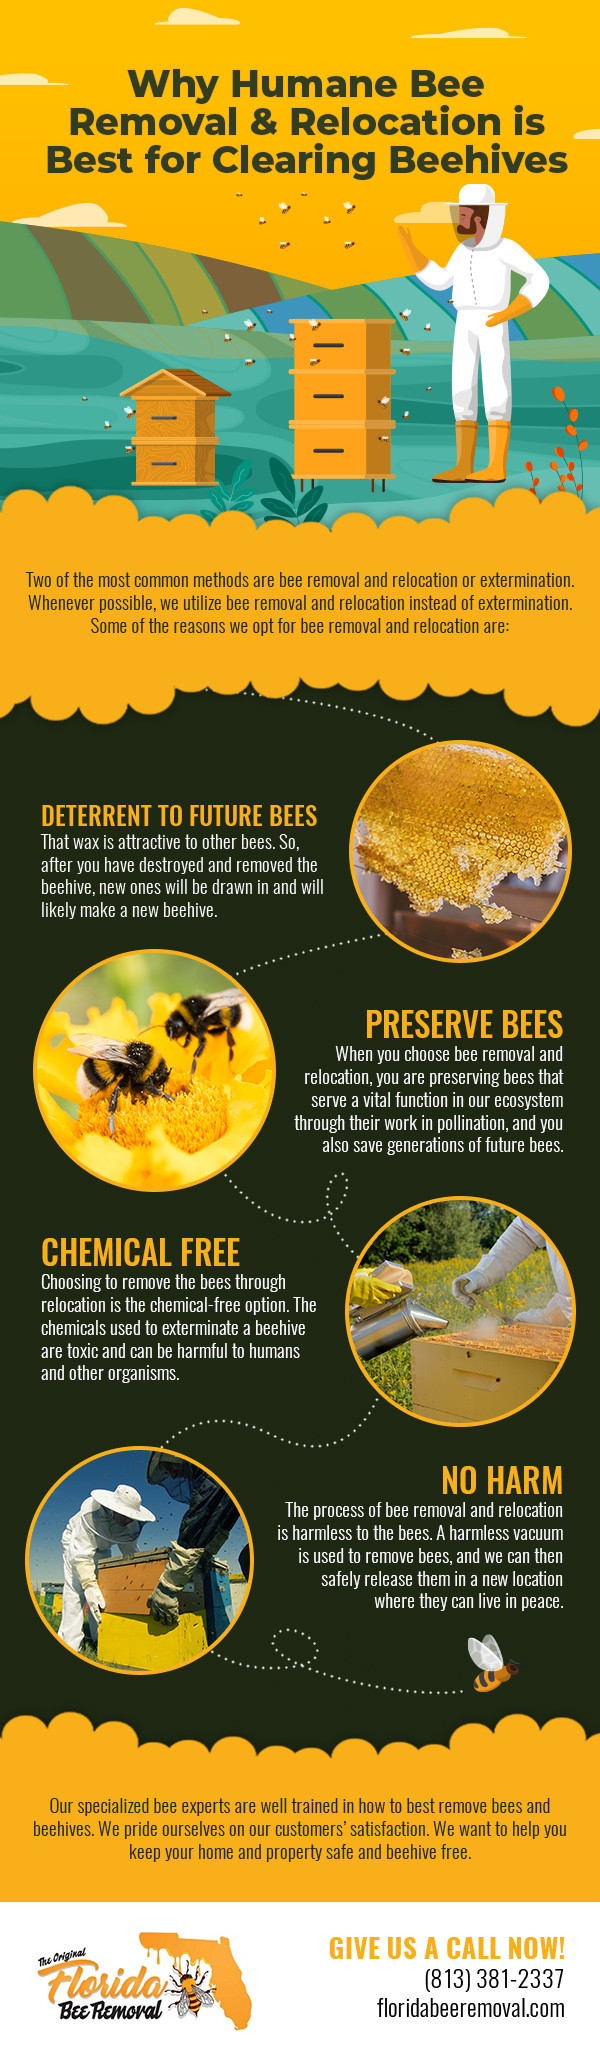 Why Humane Bee Removal & Relocation is Best for Clearing Beehives [infographic]